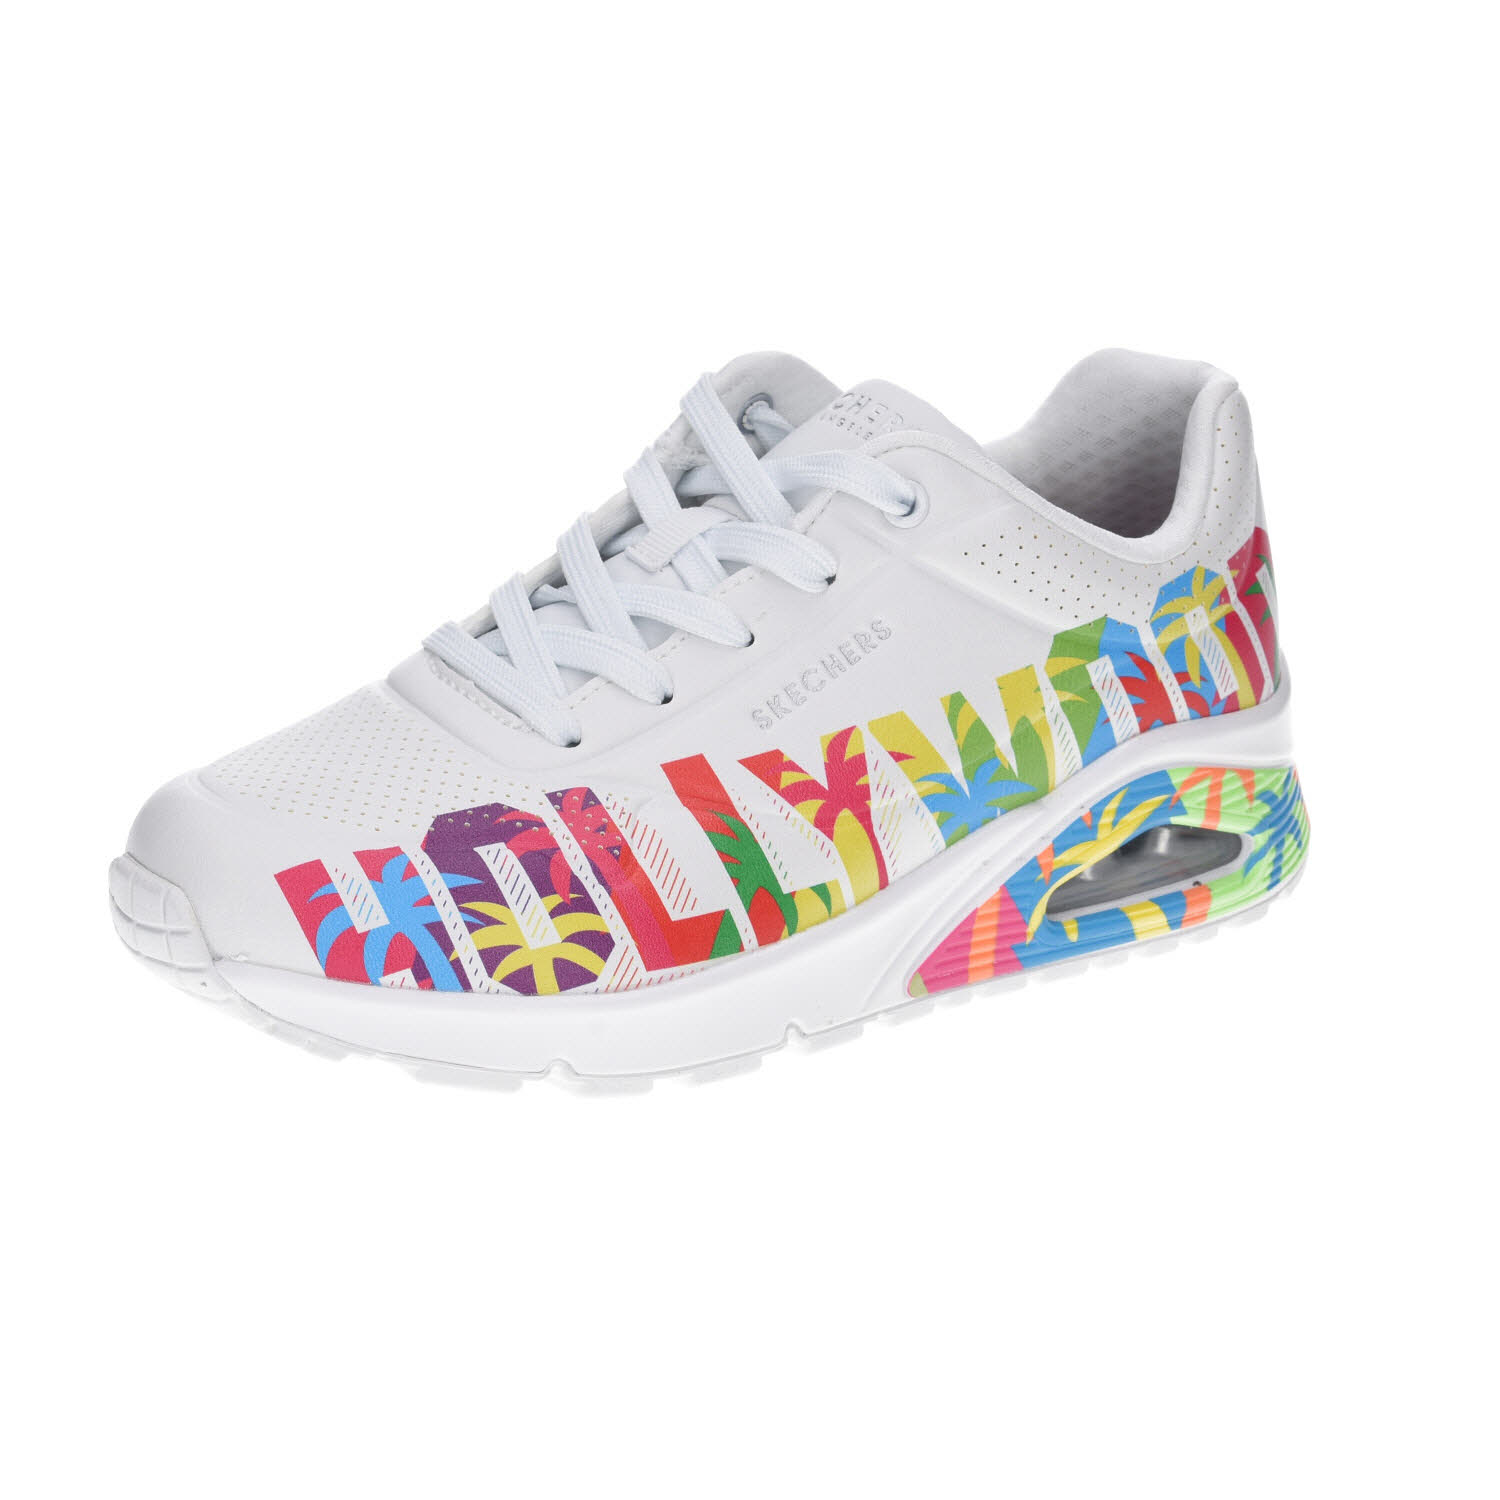 Skechers UNO One for Stars Hollywood EXKLUSIV weiß